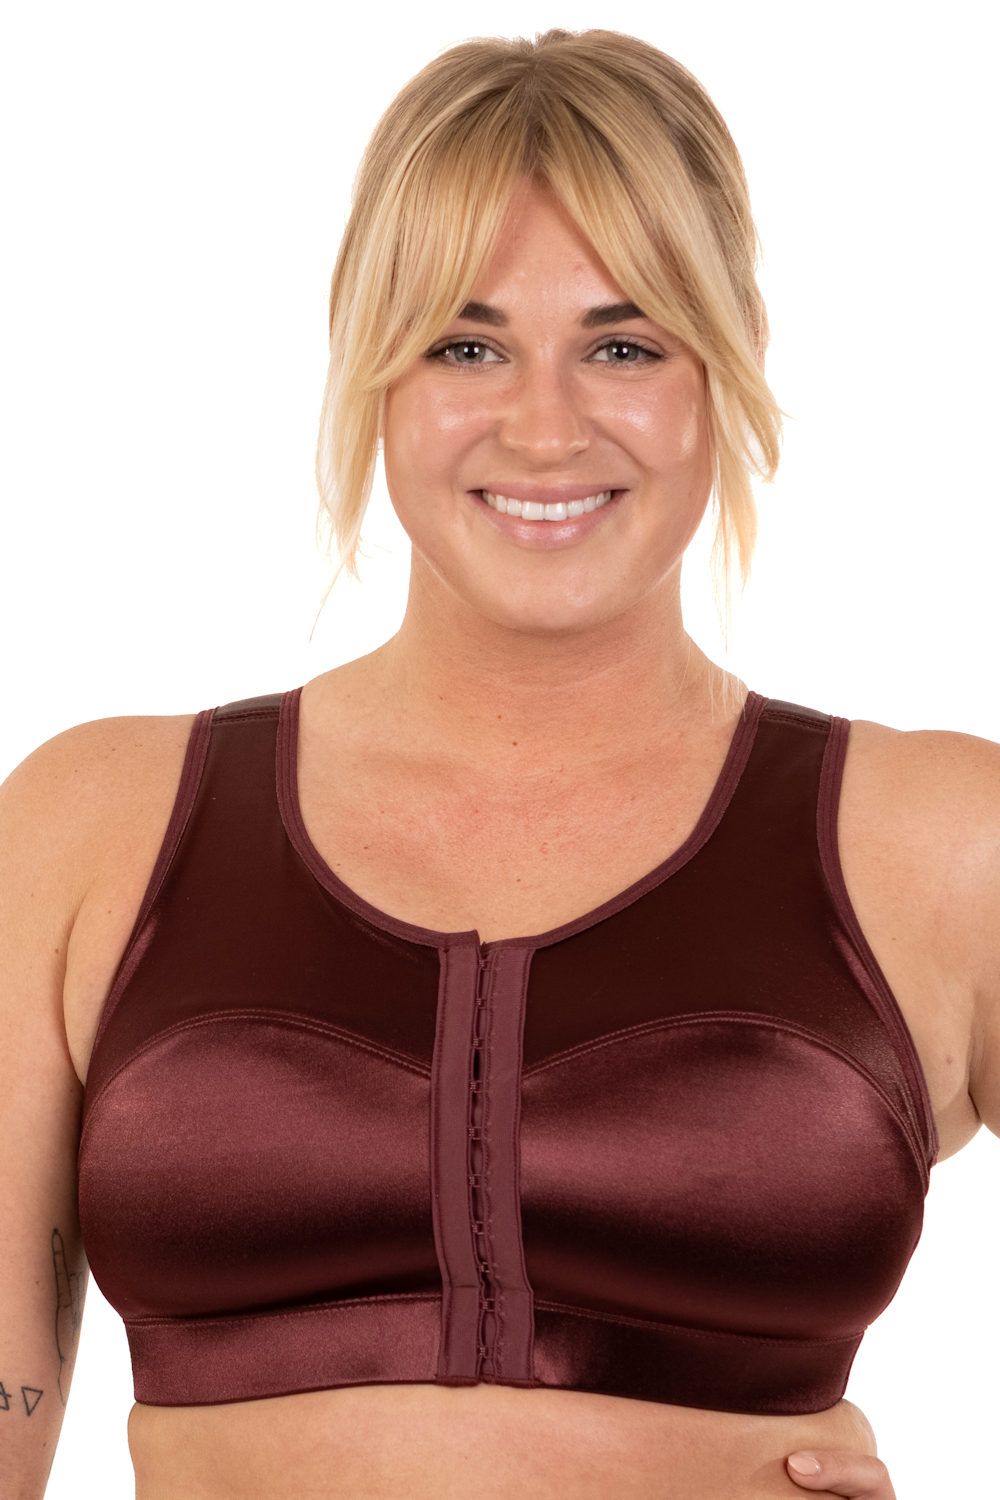 Enell Sport Bra - The Sports Bra for the Large Breast